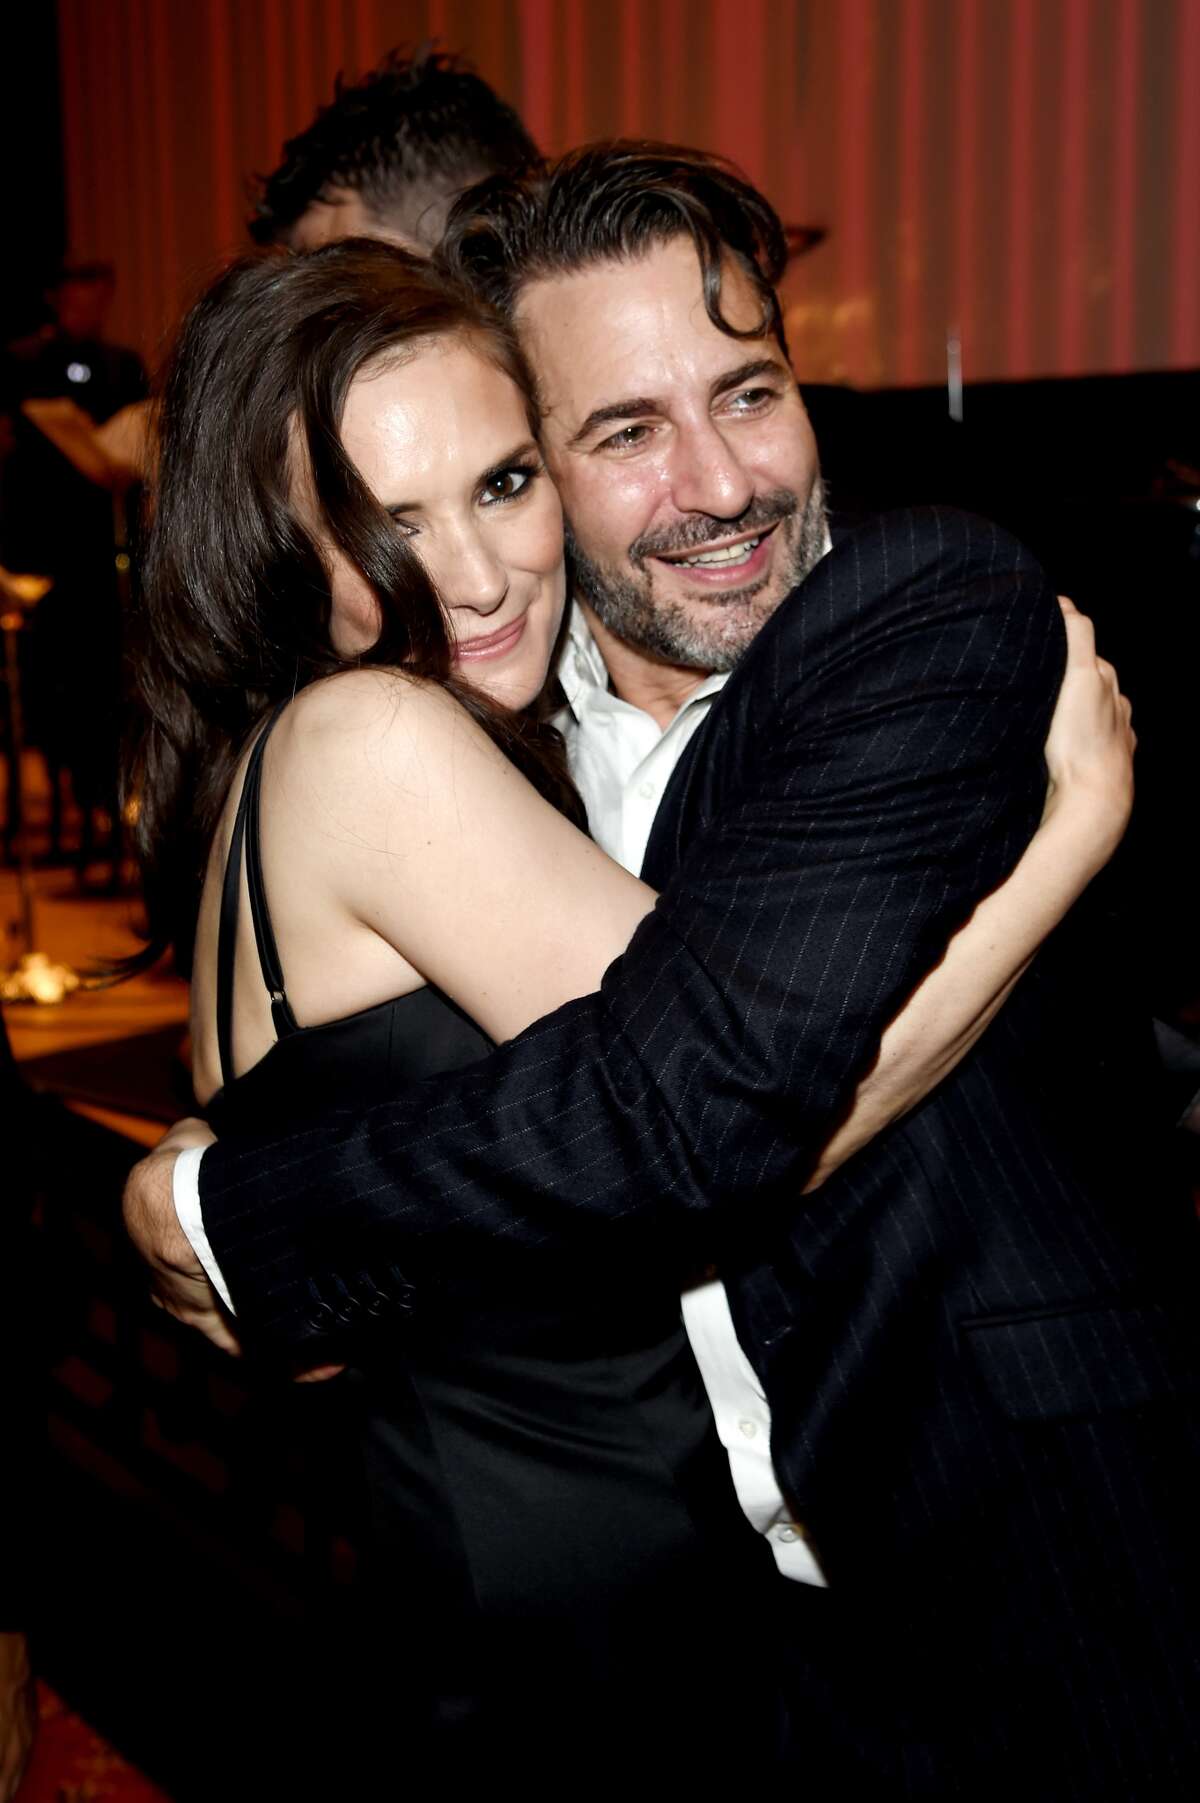 Winona Ryder and designer Marc Jacobs are now in partnership together. Keep clicking to see photos of Ryder through the years.